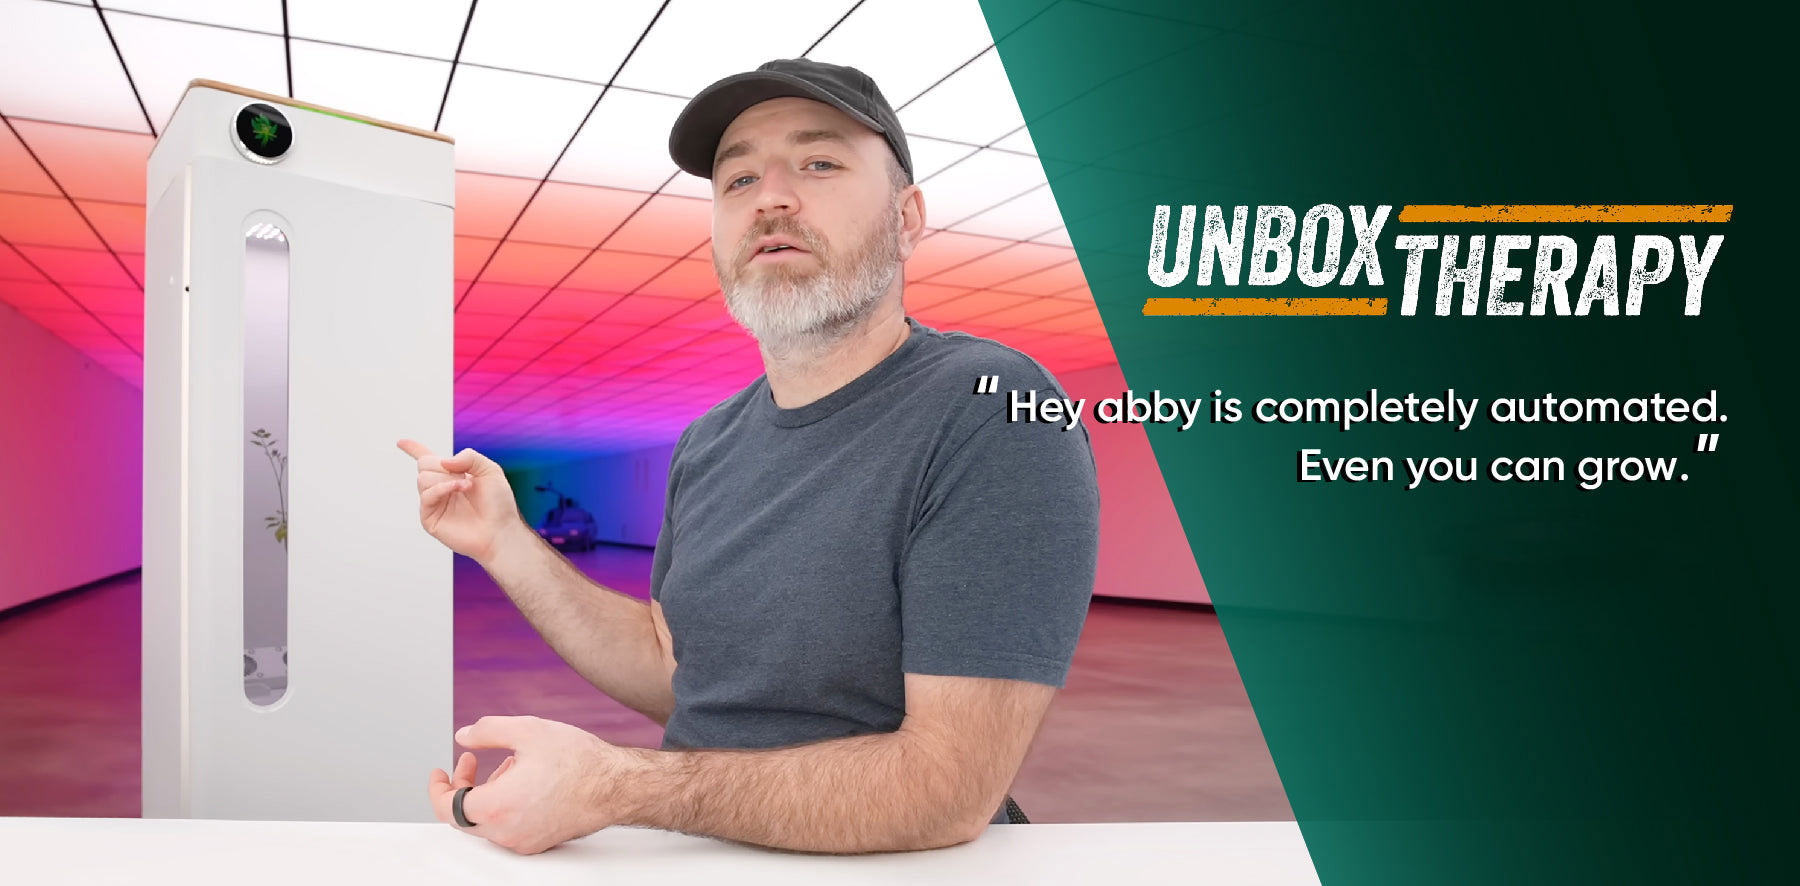 Hey abby OG grow box for weed reviewed by Unbox Therapy